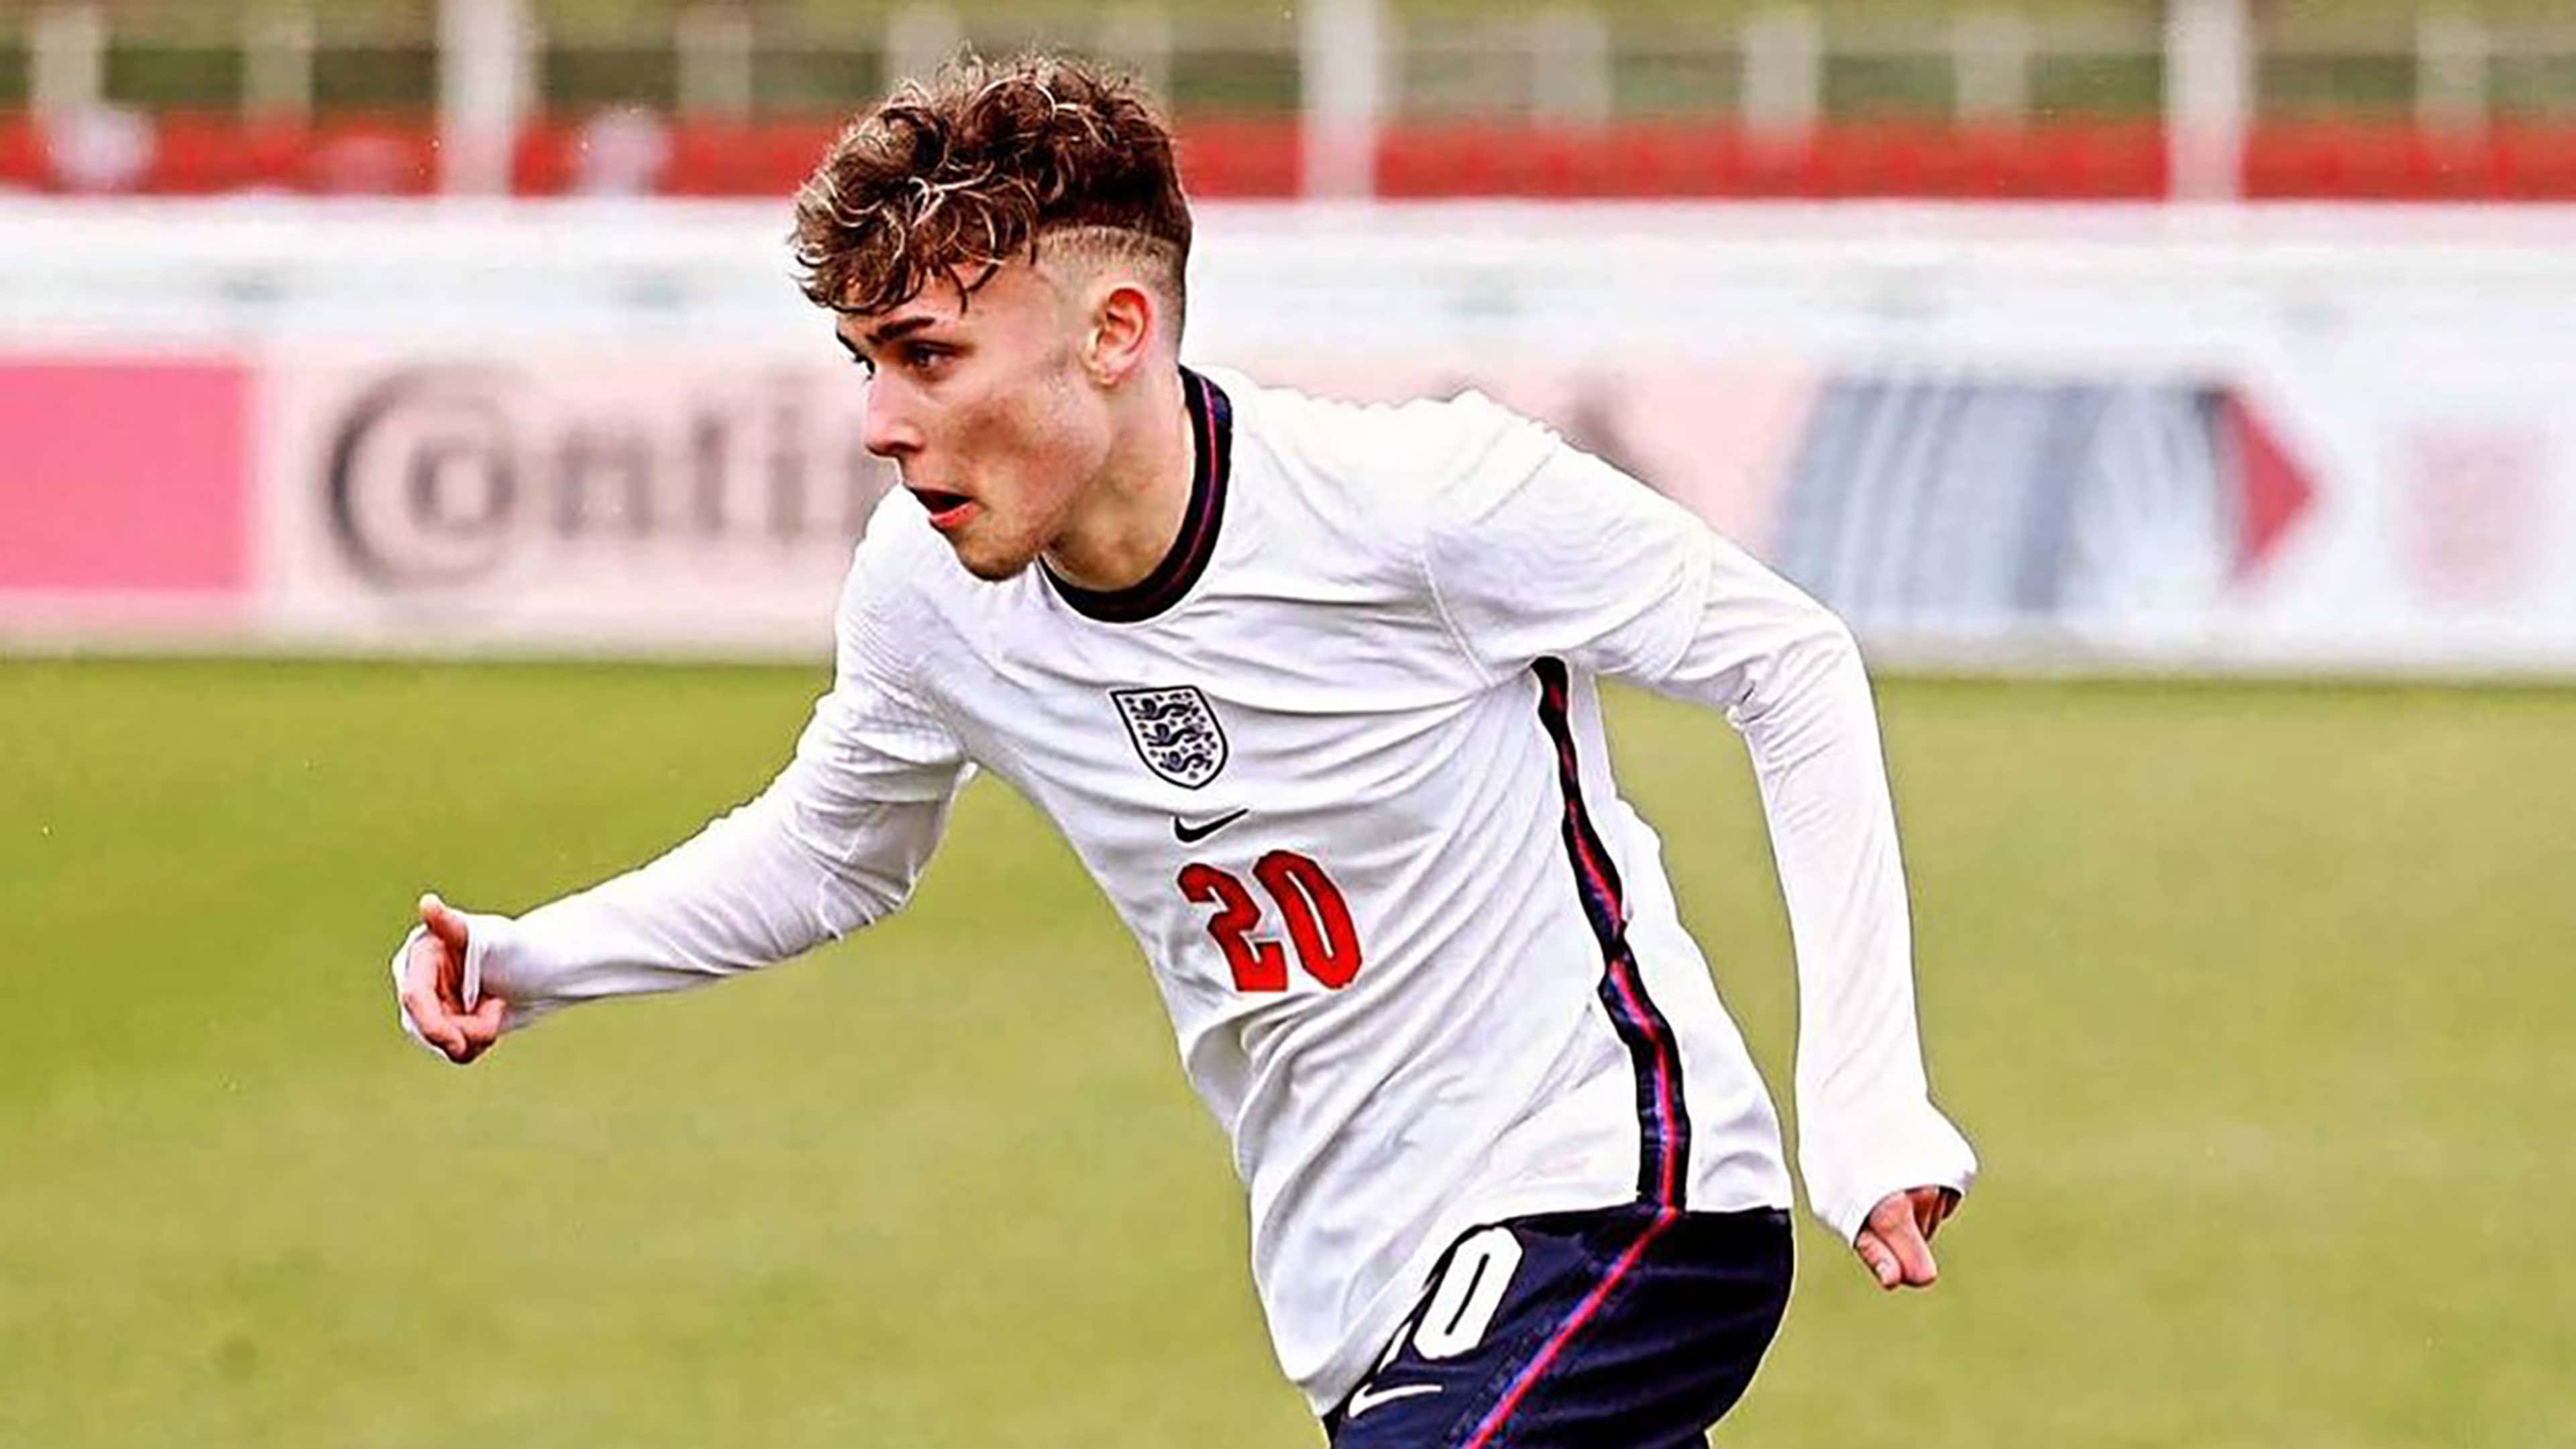 Reports: Liverpool complete deals for highly-rated teenage